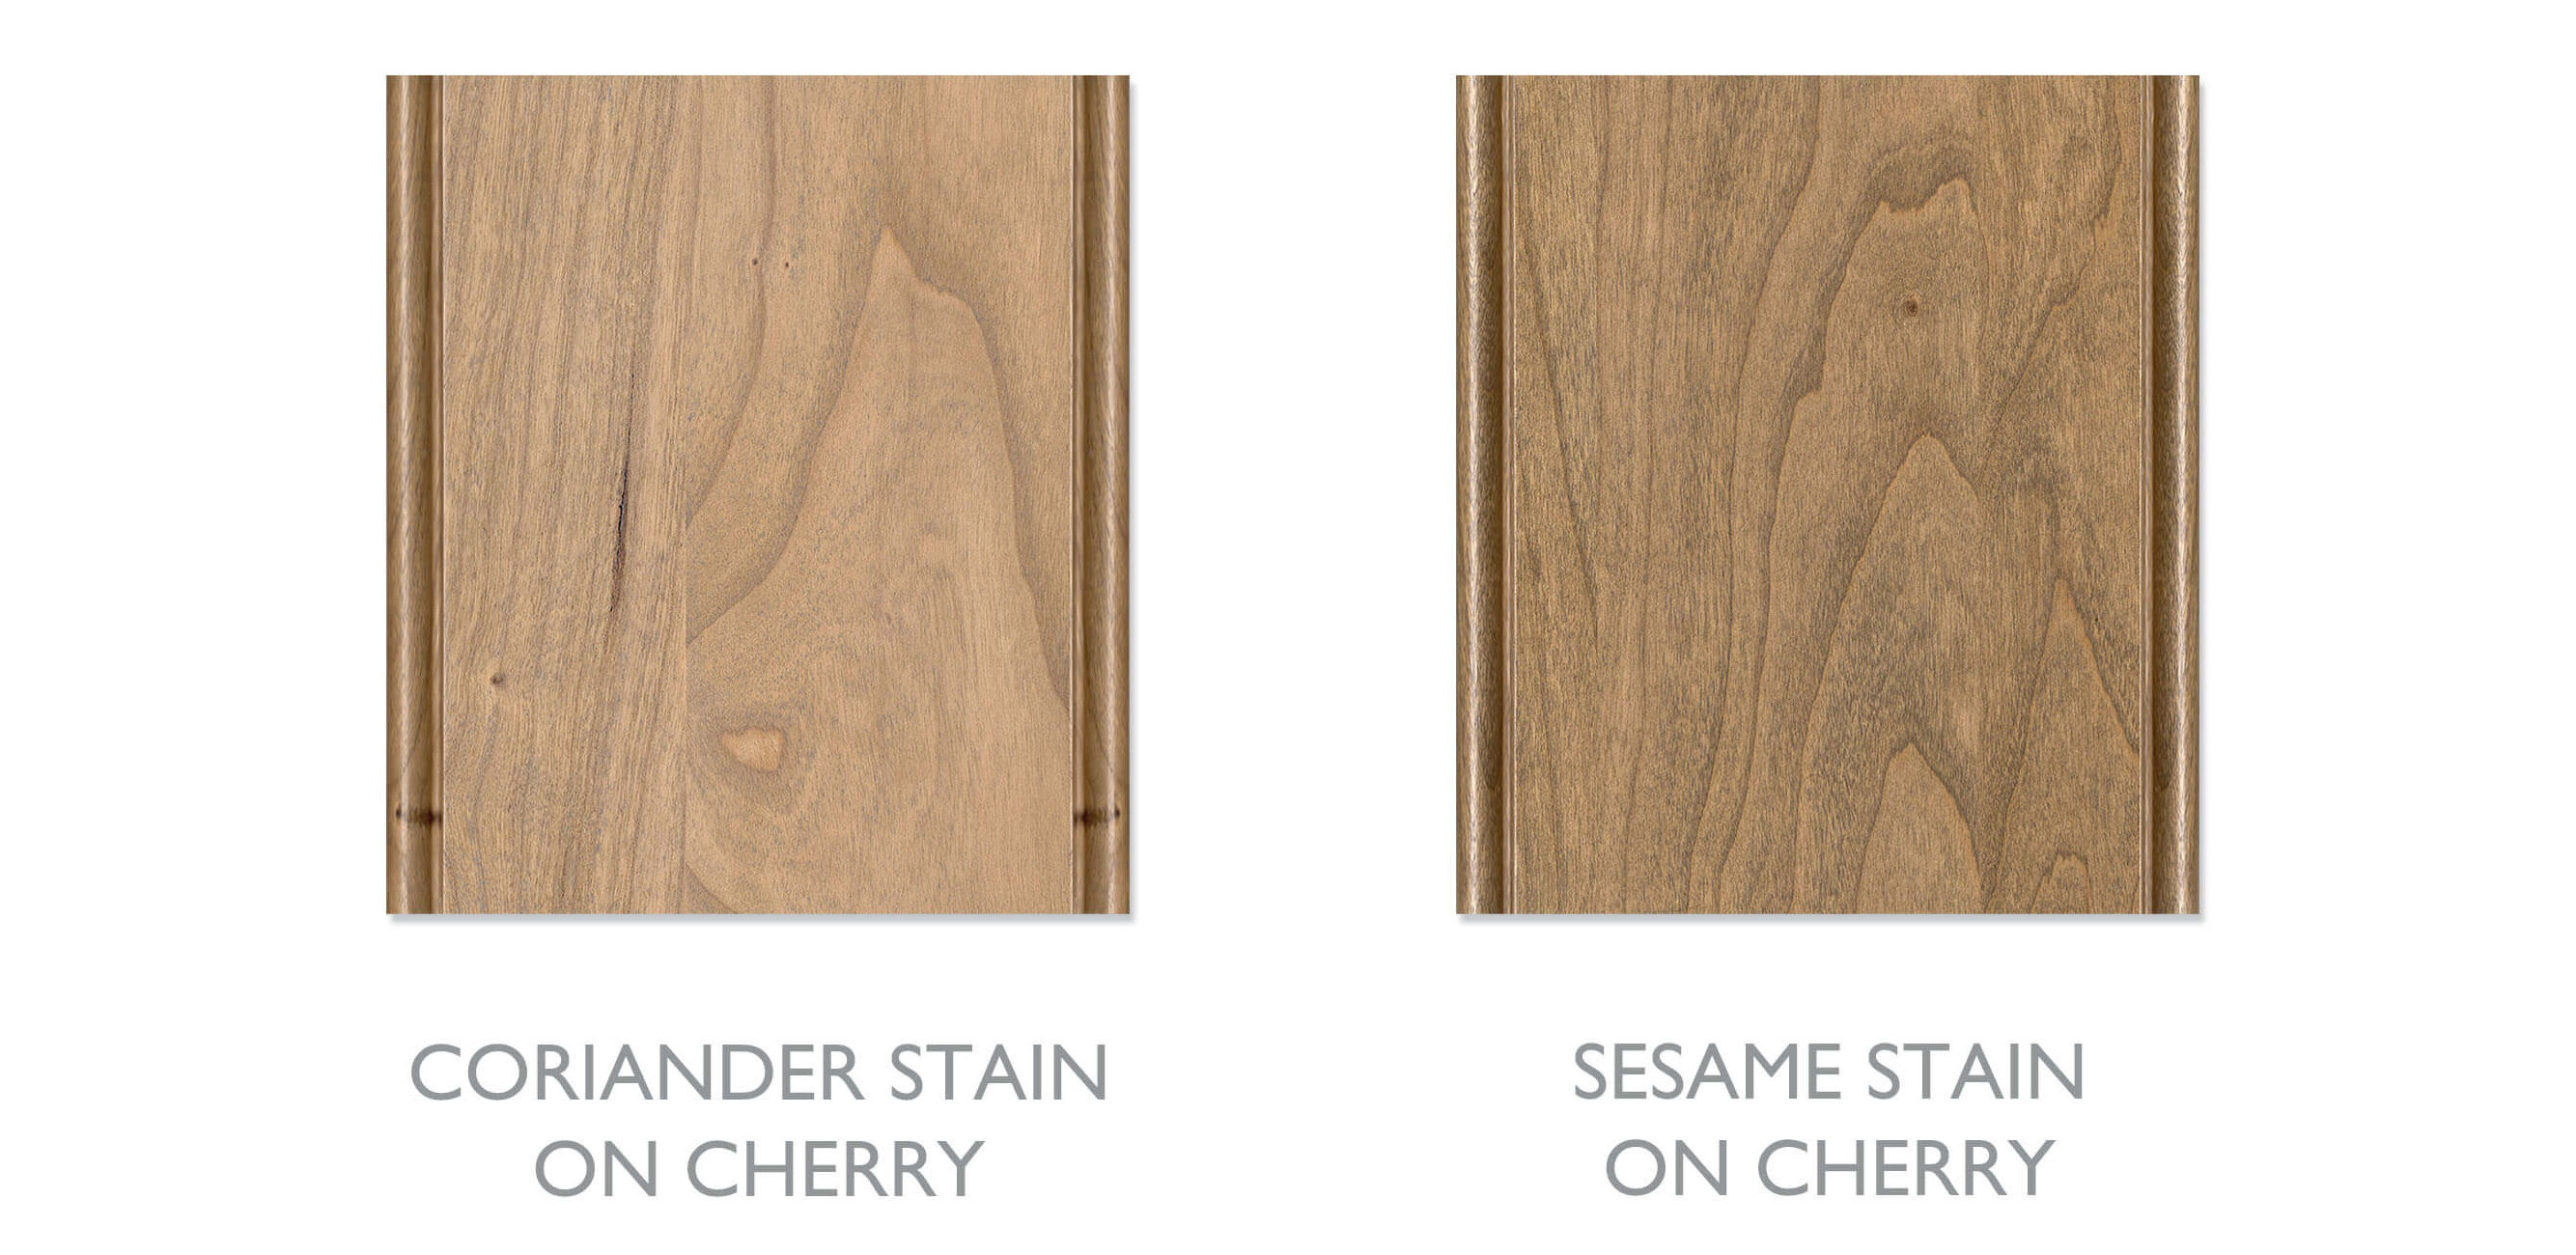 Two examples of raw, light stain colors from Dura Supreme showing Coriander and Sesame stains on Cherry.